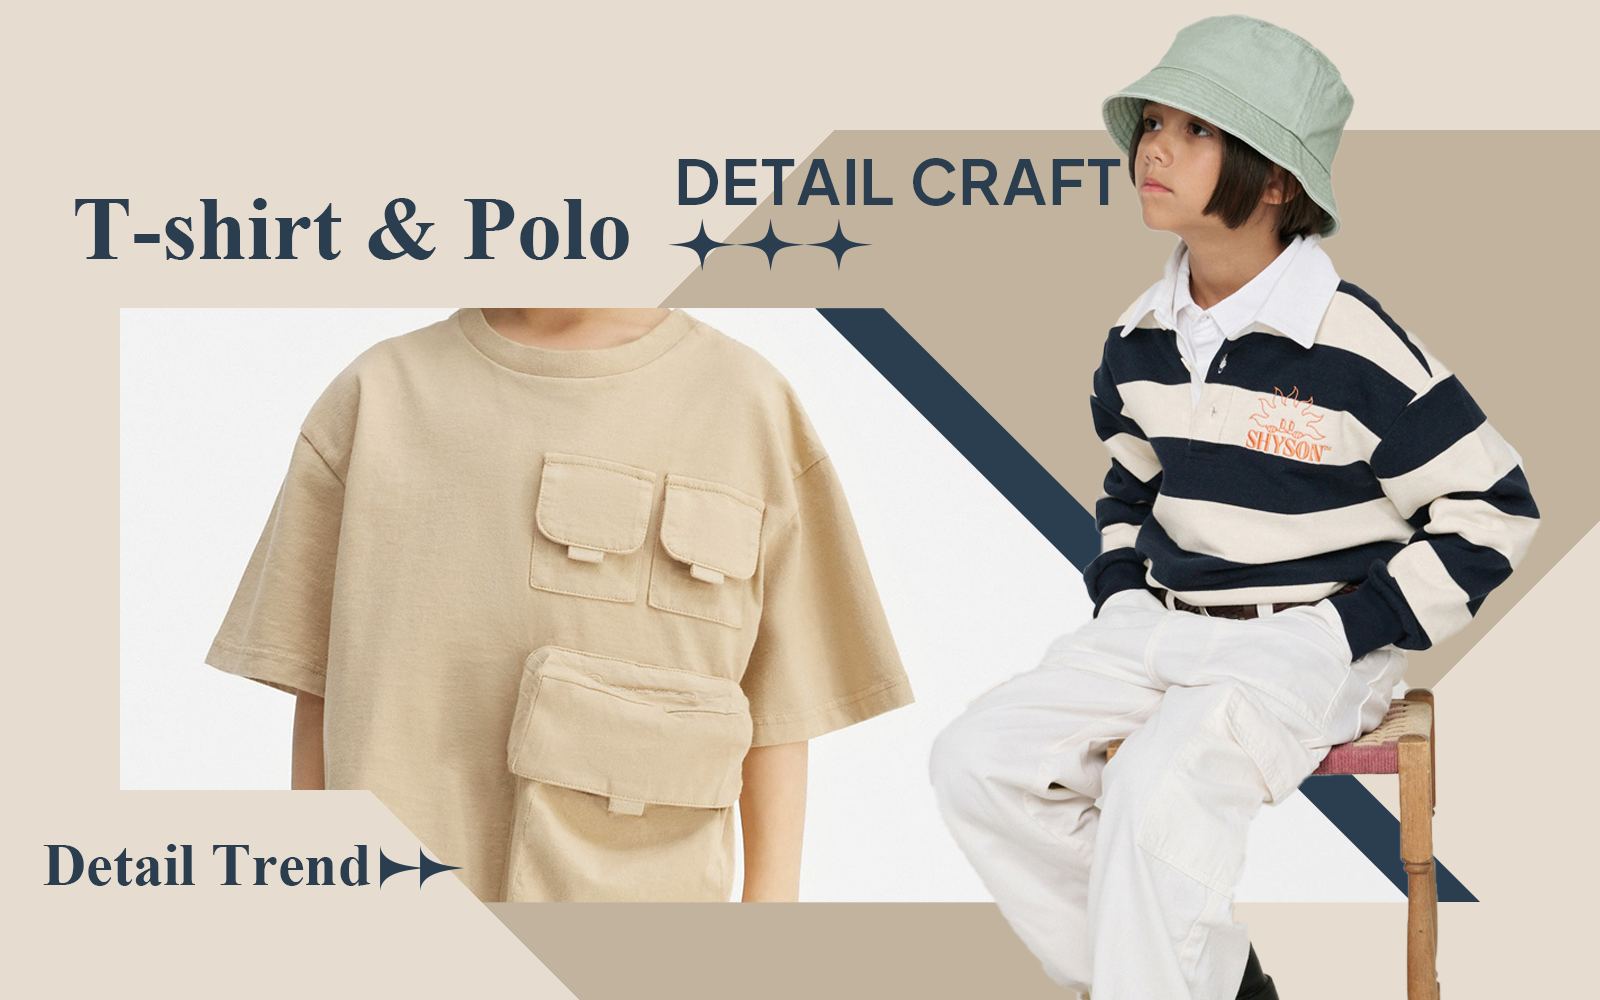 T-shirt/Polo Shirt -- The Detail & Craft Trend for Kidswear